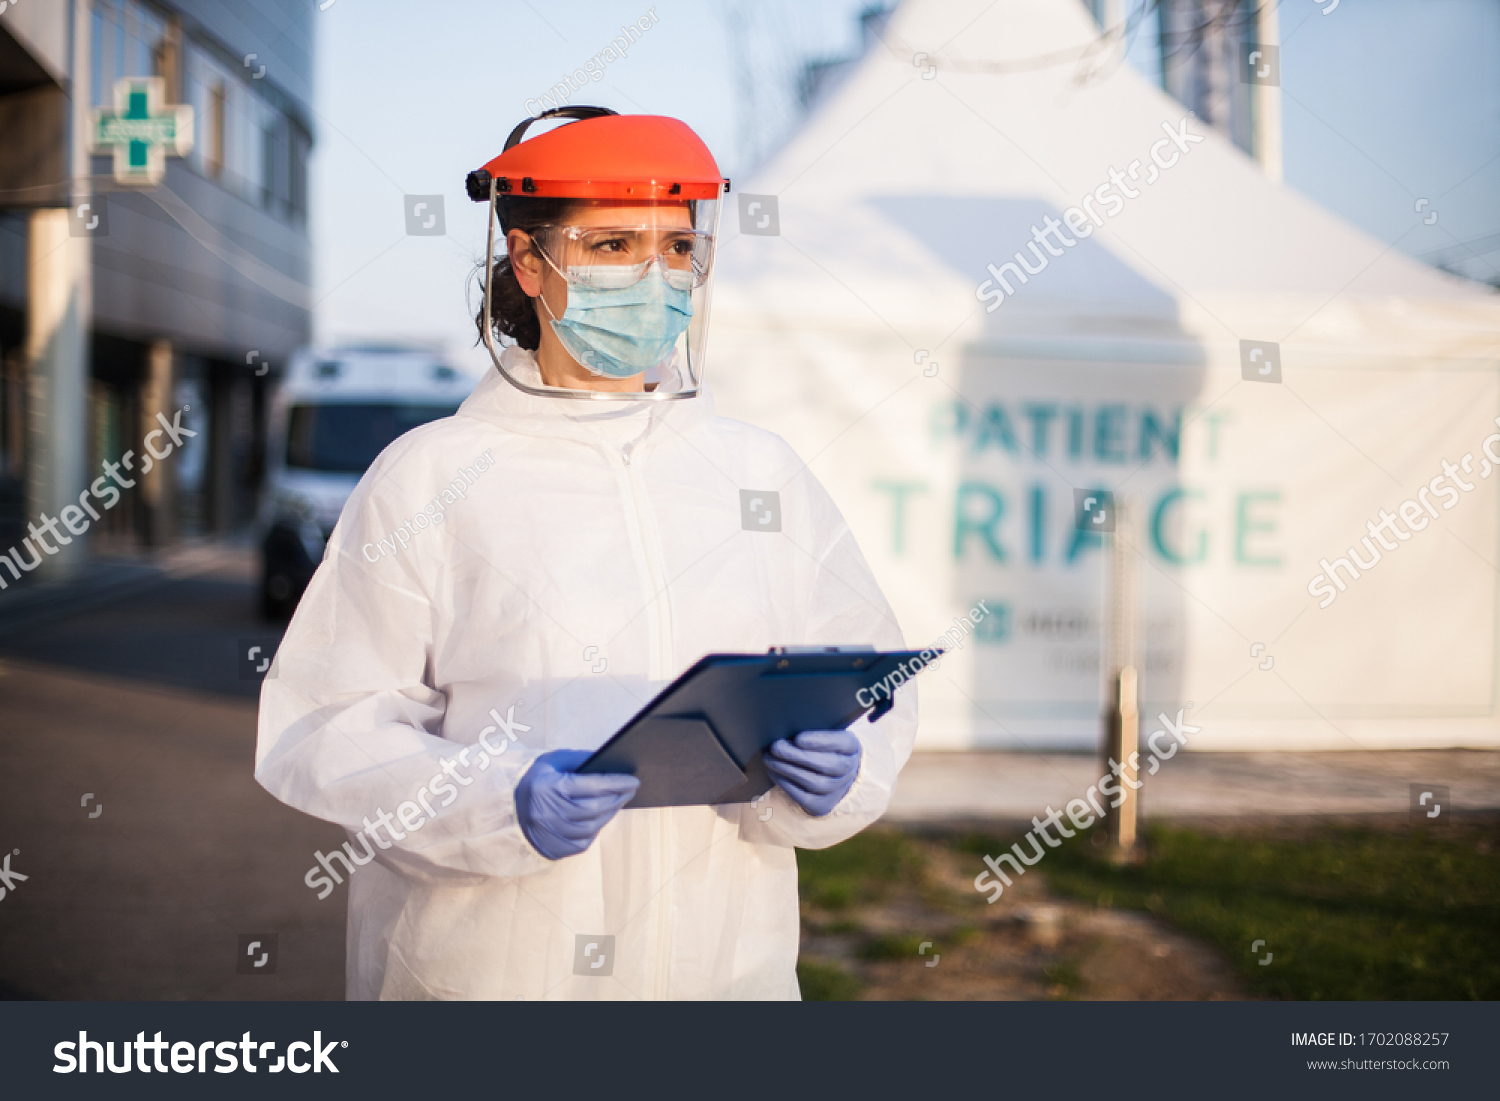 Paramedic wearing personal protective equipment PPE holding folder standing in front of ICU hospital isolation rt-PCR drive thru testing site,COVID-19 pandemic outbreak crisis,worried exhausted staff #1702088257